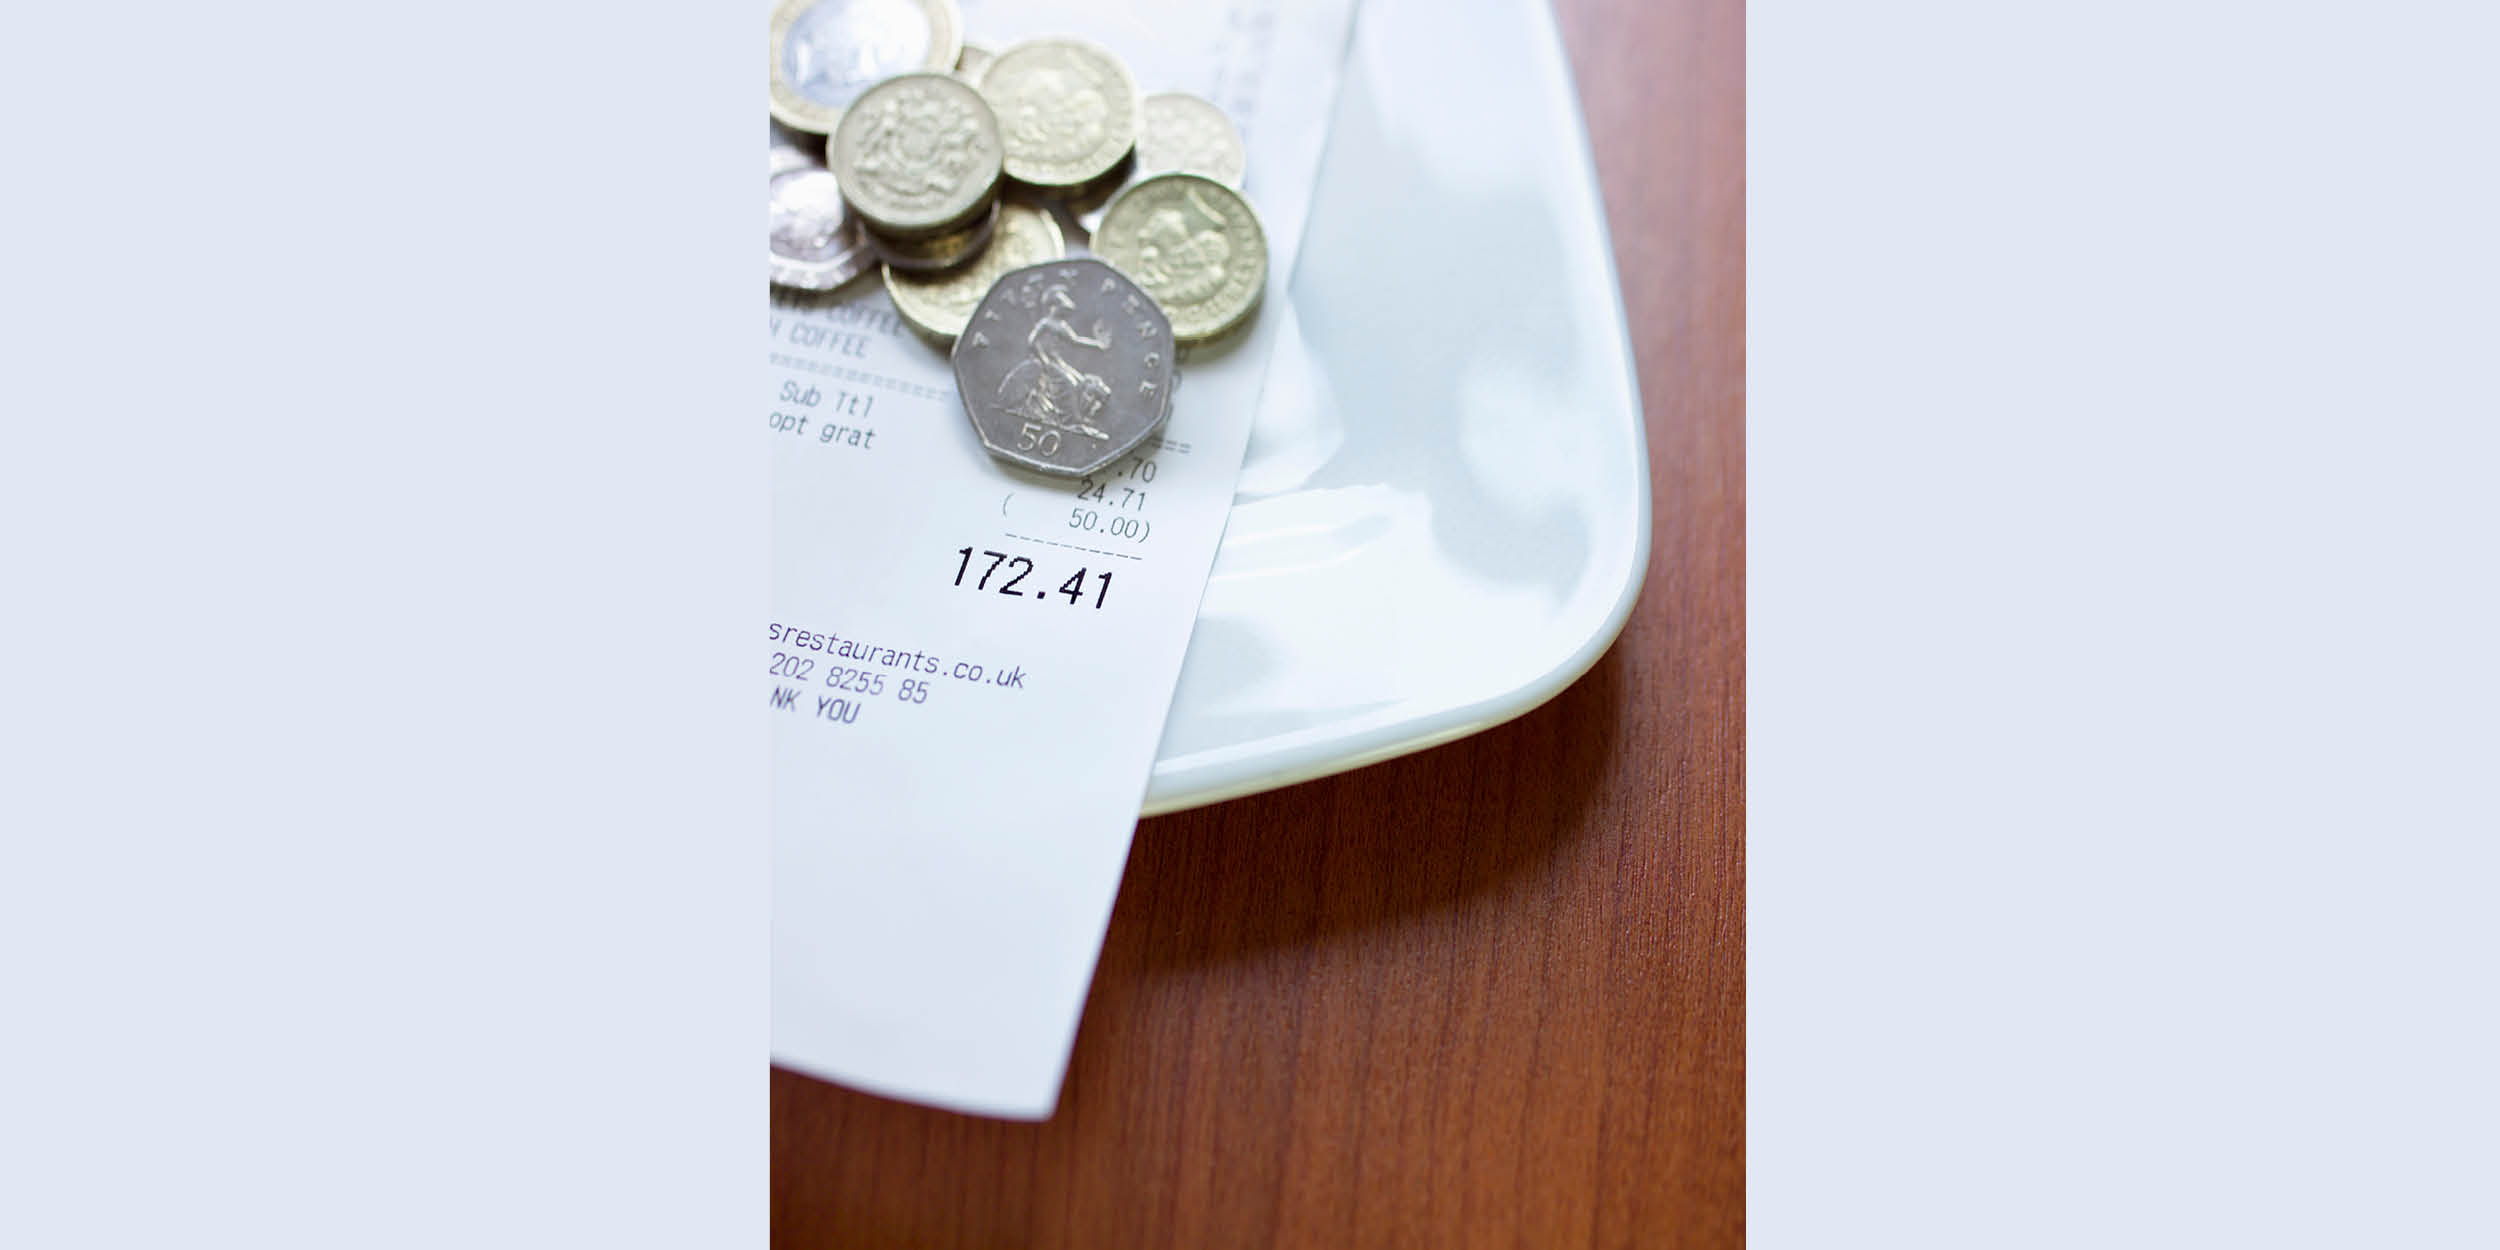 Tipping law delayed until October